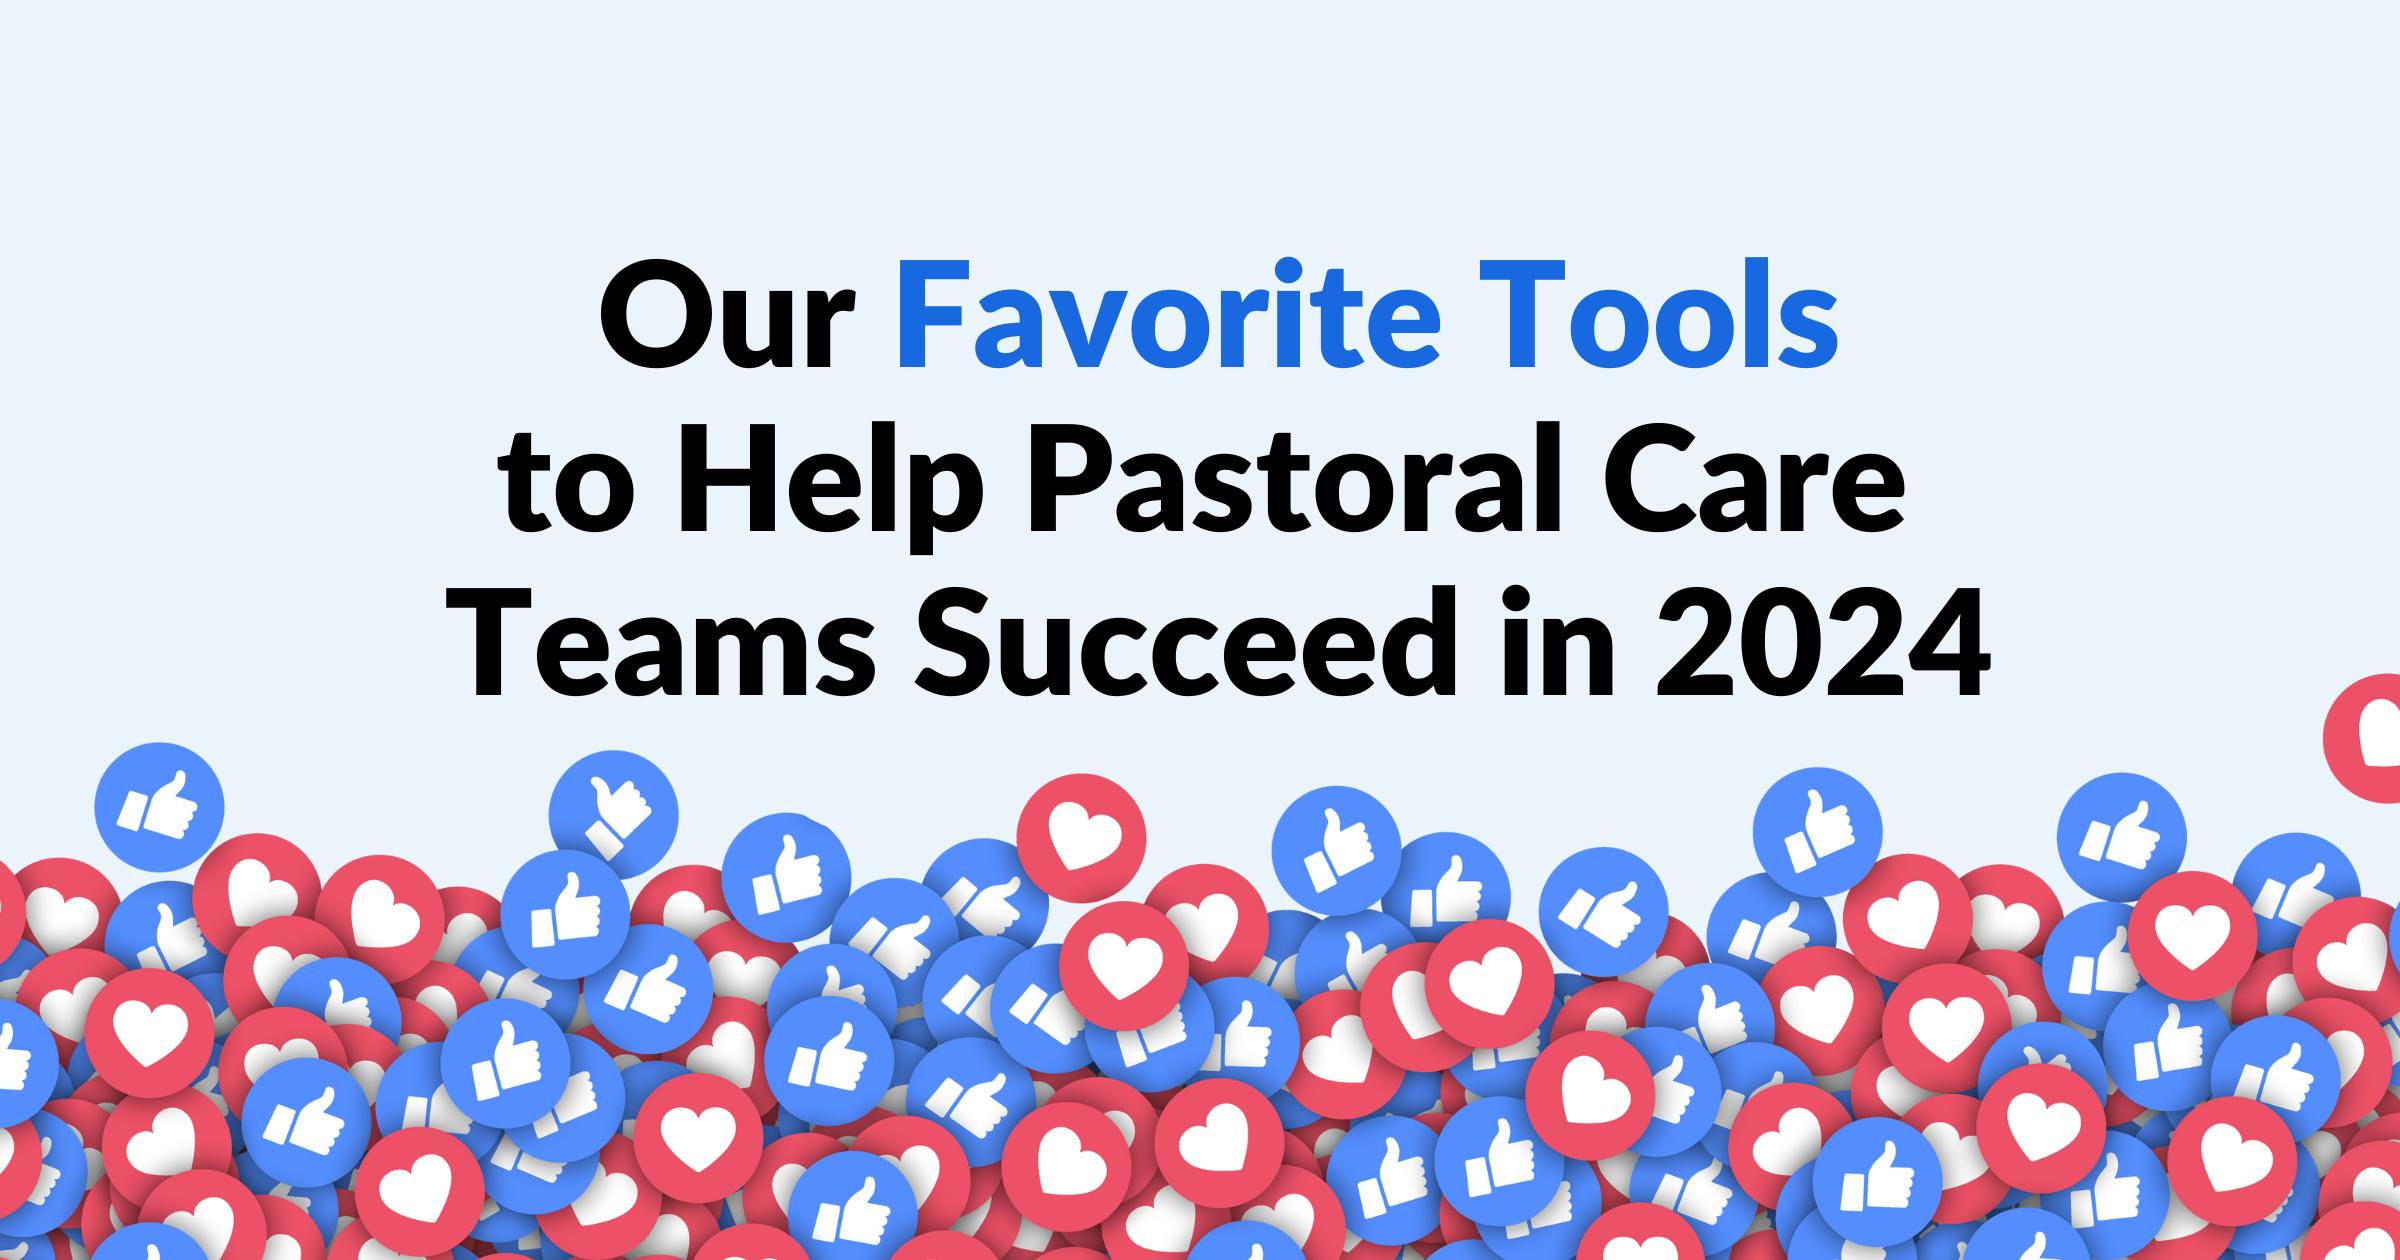 Our Favorite Tools to Help Pastoral Care Teams Succeed in 2024